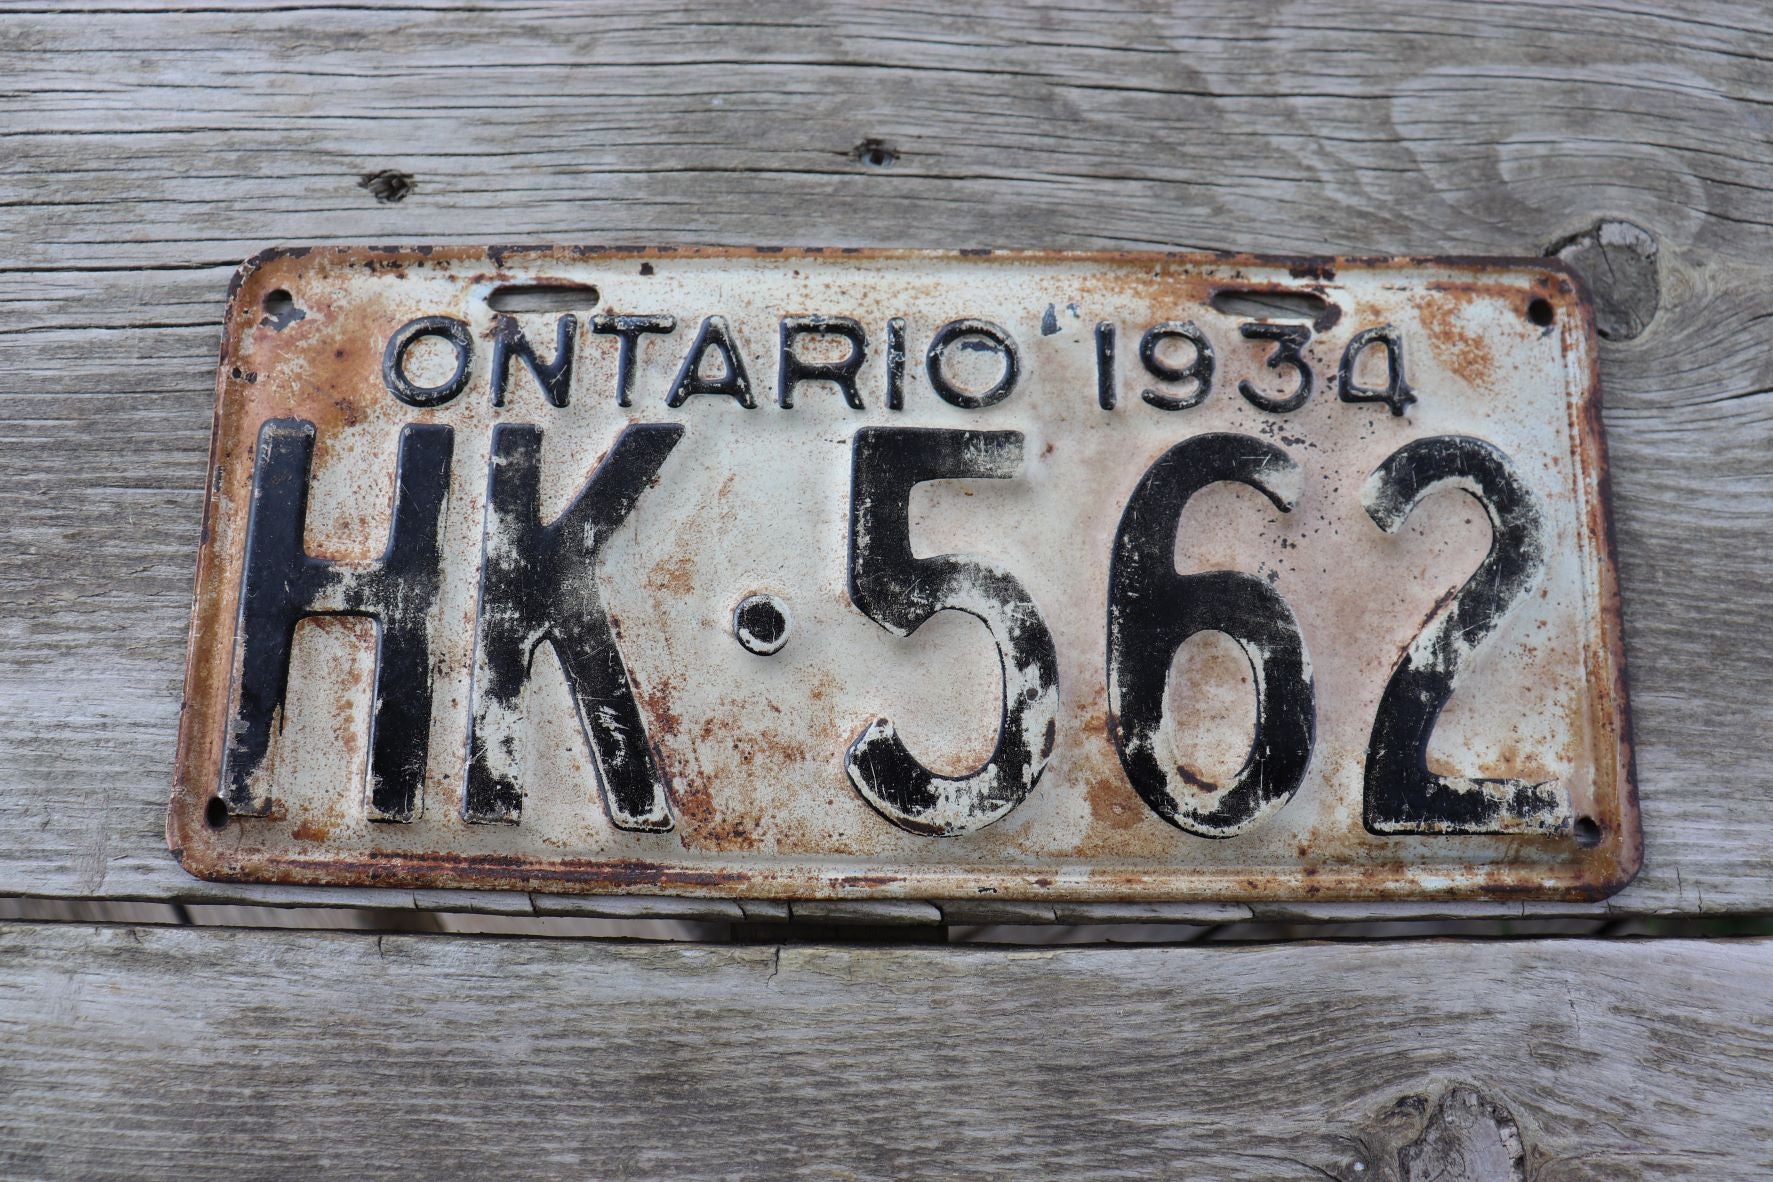 Ontario 1934 License Plate